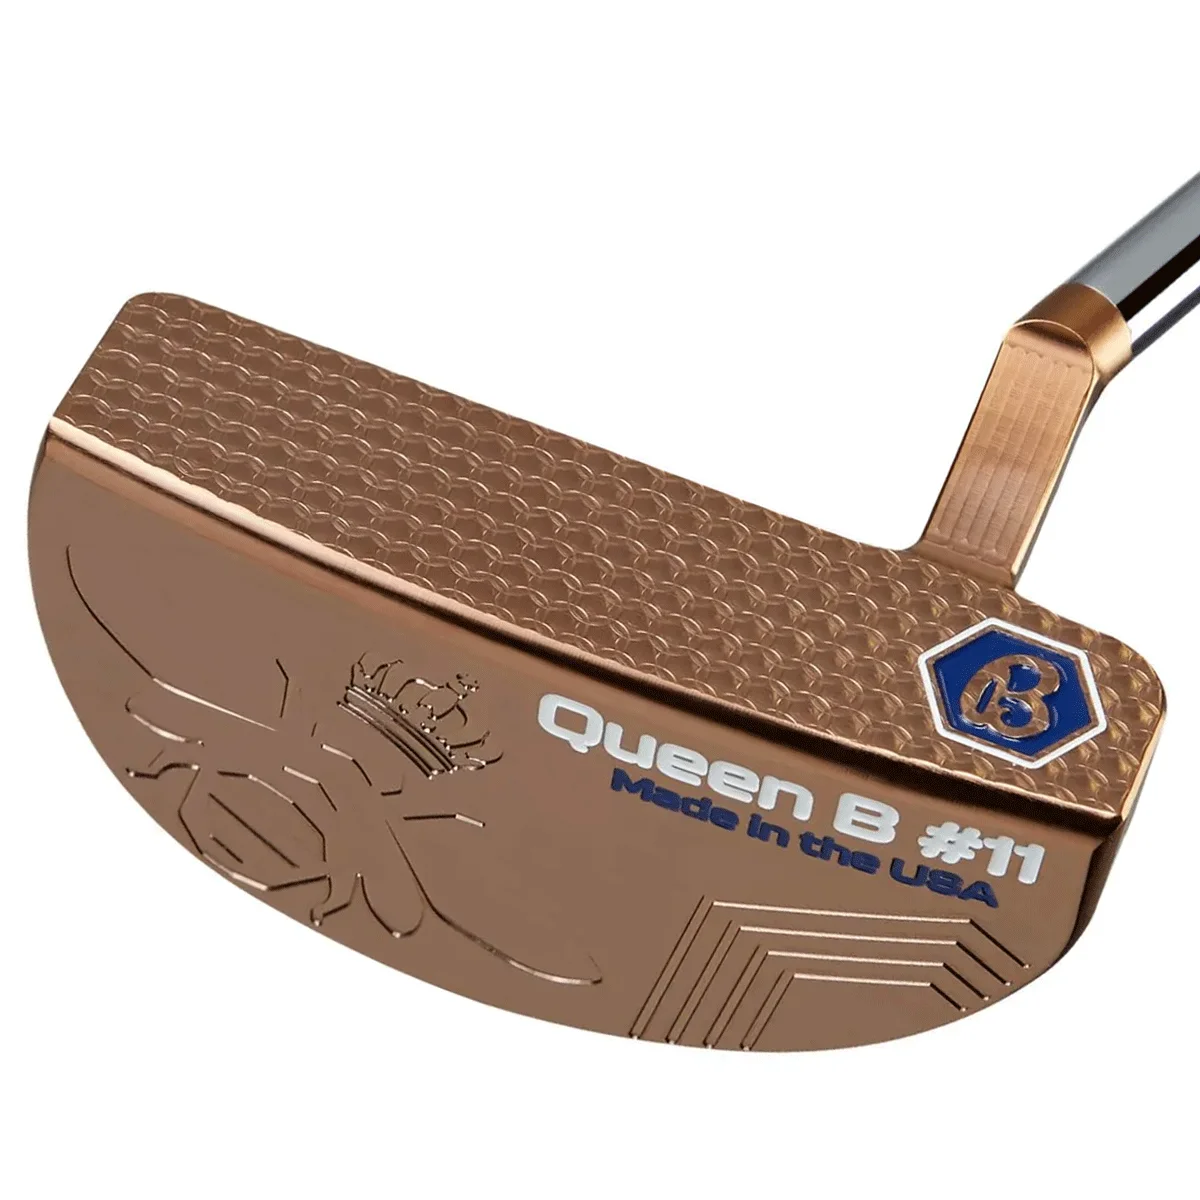 2022 Top Quality Golf Putter Bettinardi Queen B#11 Putter 33/34/35inch With Head cover Golf Clubs